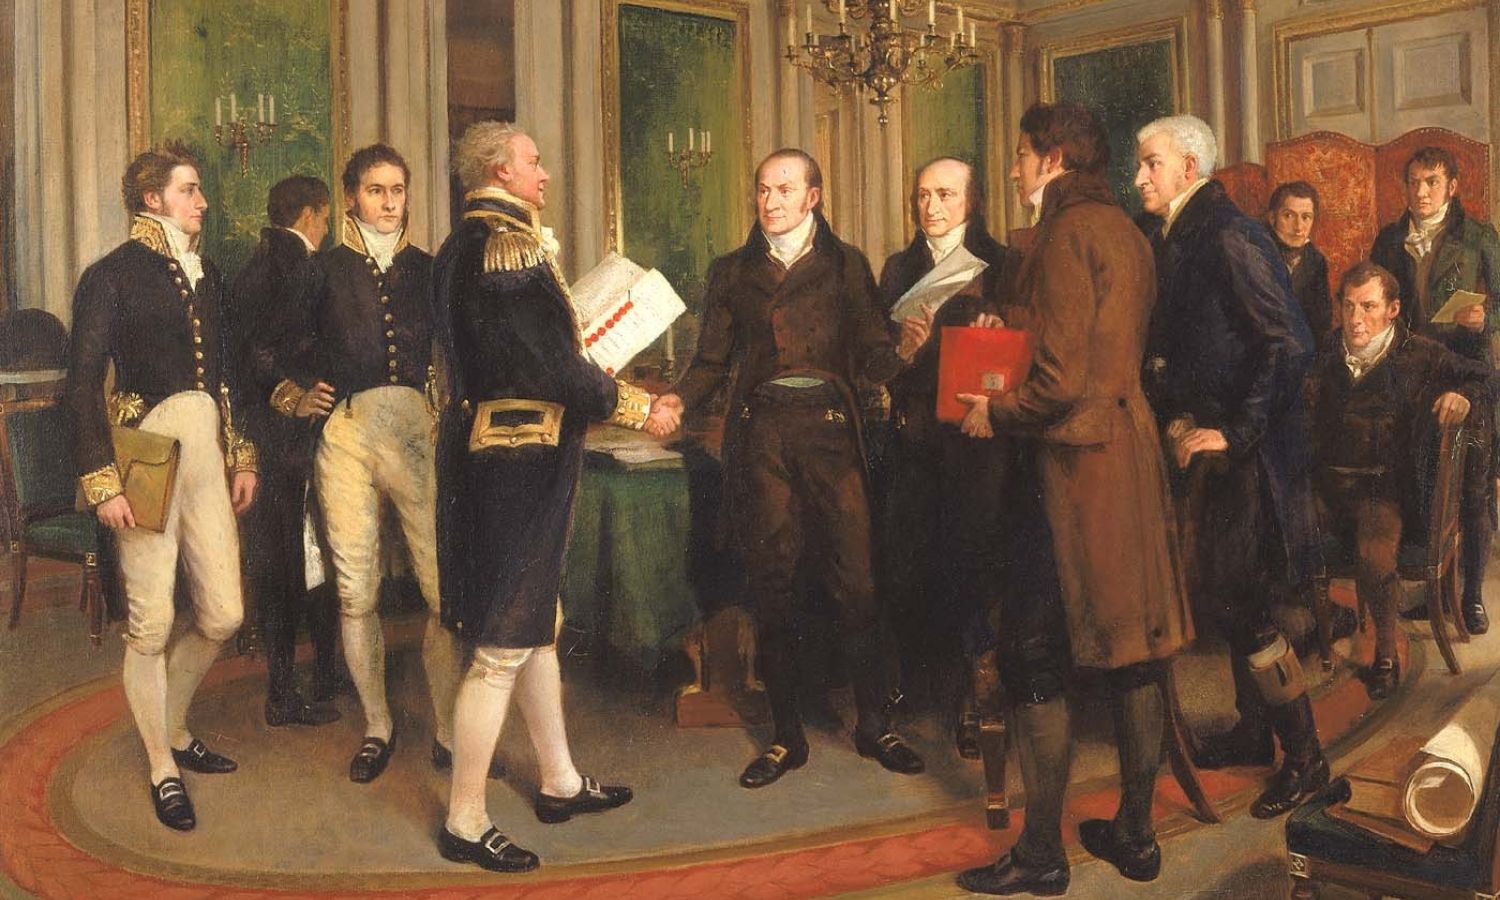 OTD in 1814: The Treaty of Ghent was signed